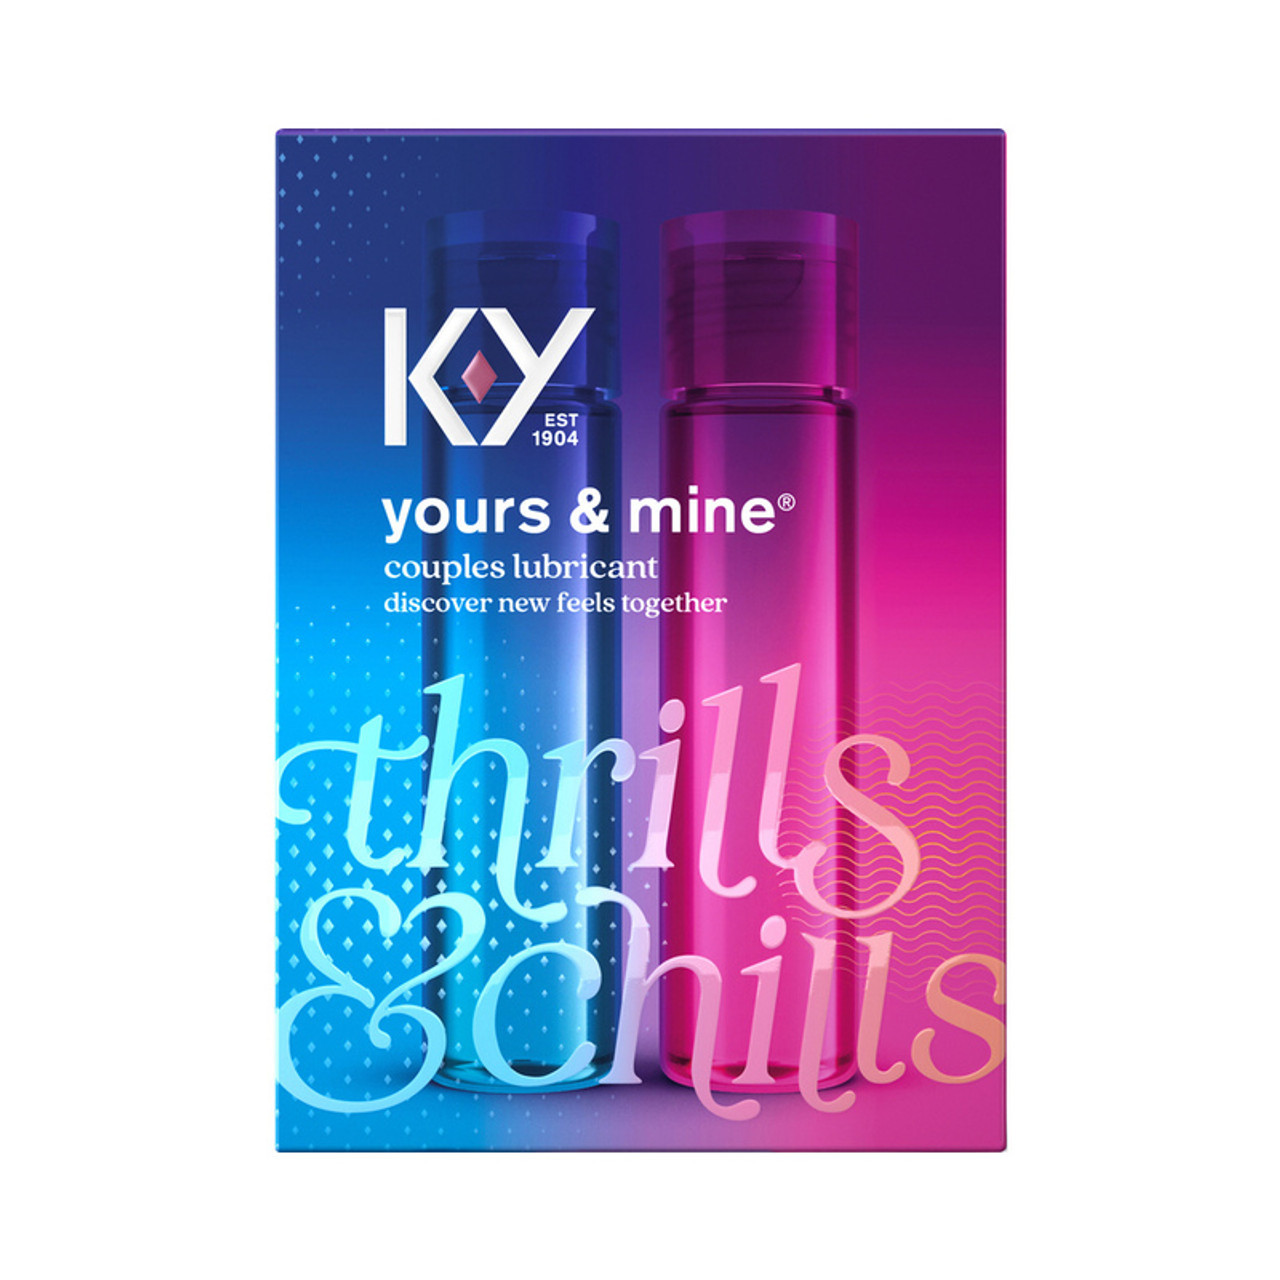 K-Y Yours & Mine Couples Lubricant